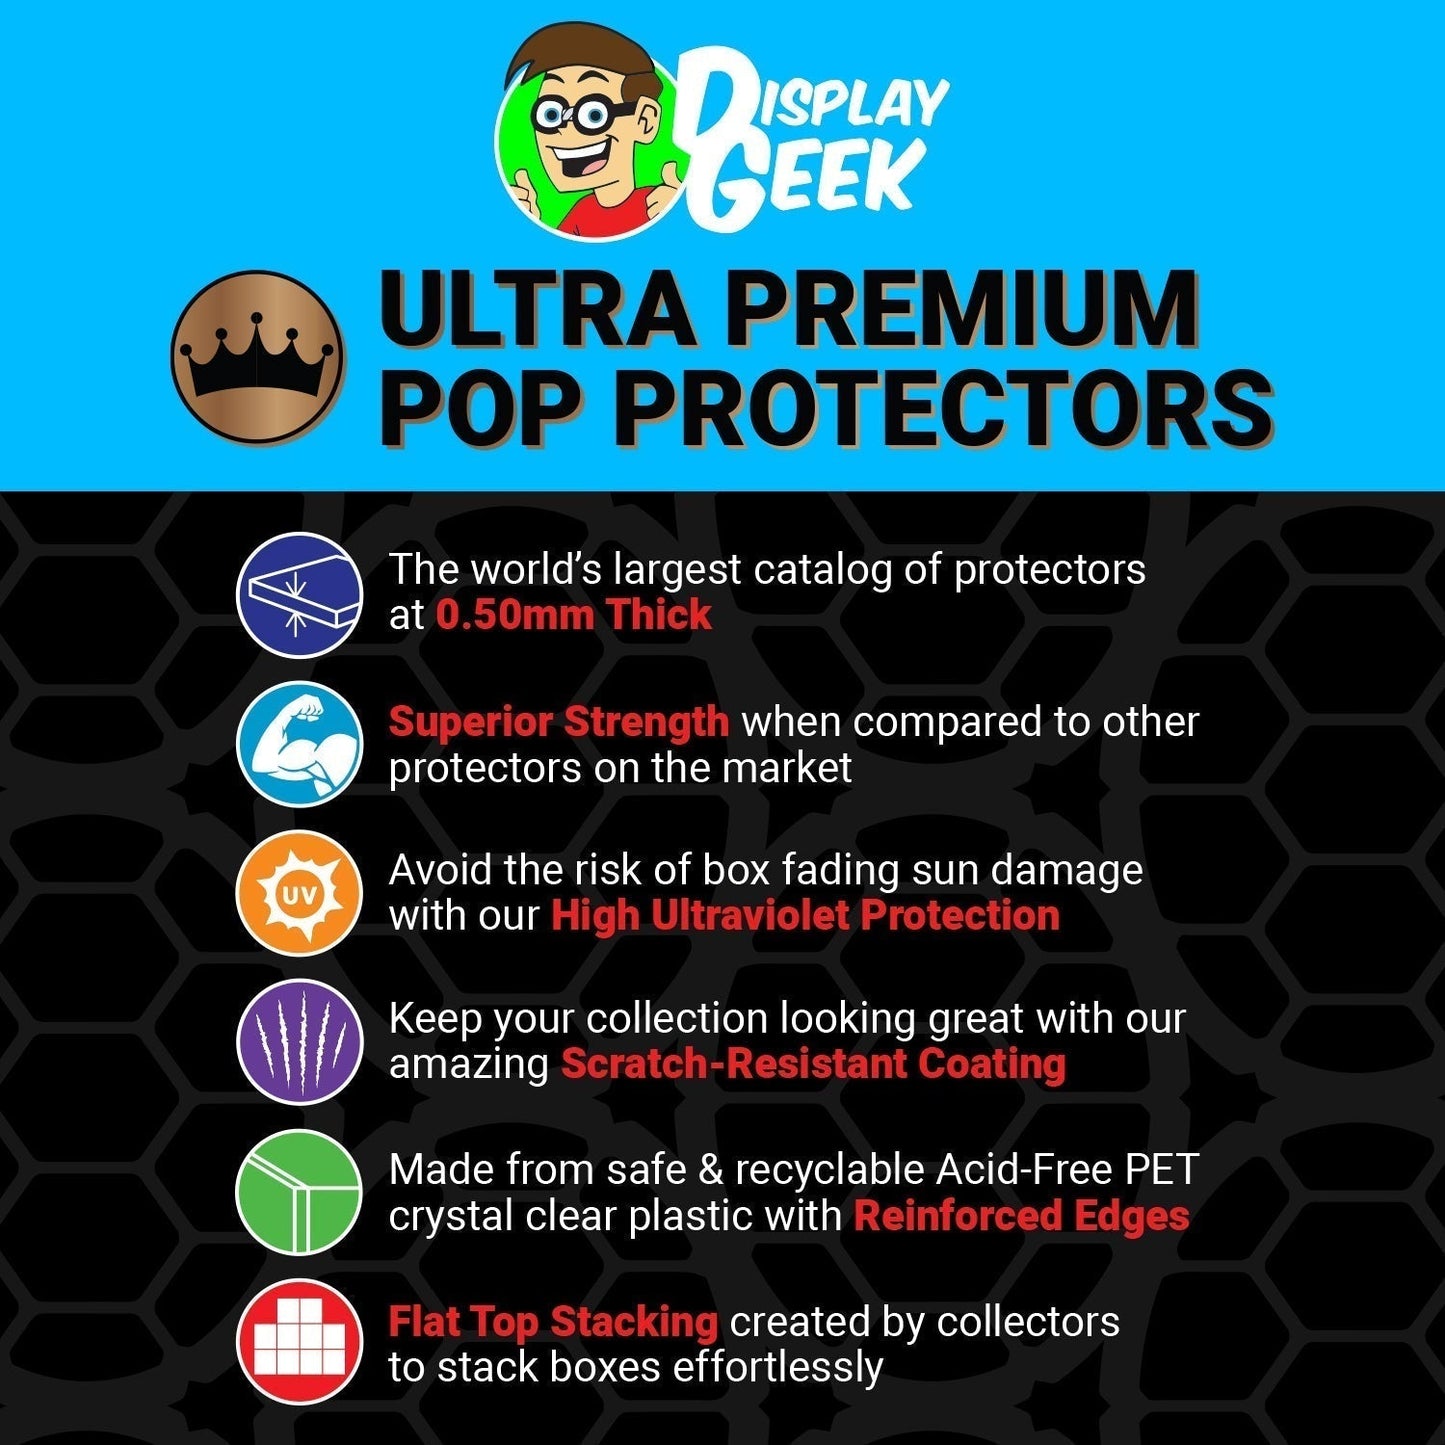 Pop Protector for Funkoverse Marvel 101 Chase Diamond Funko Expansion - PPG Pop Protector Guide Search Created by Display Geek